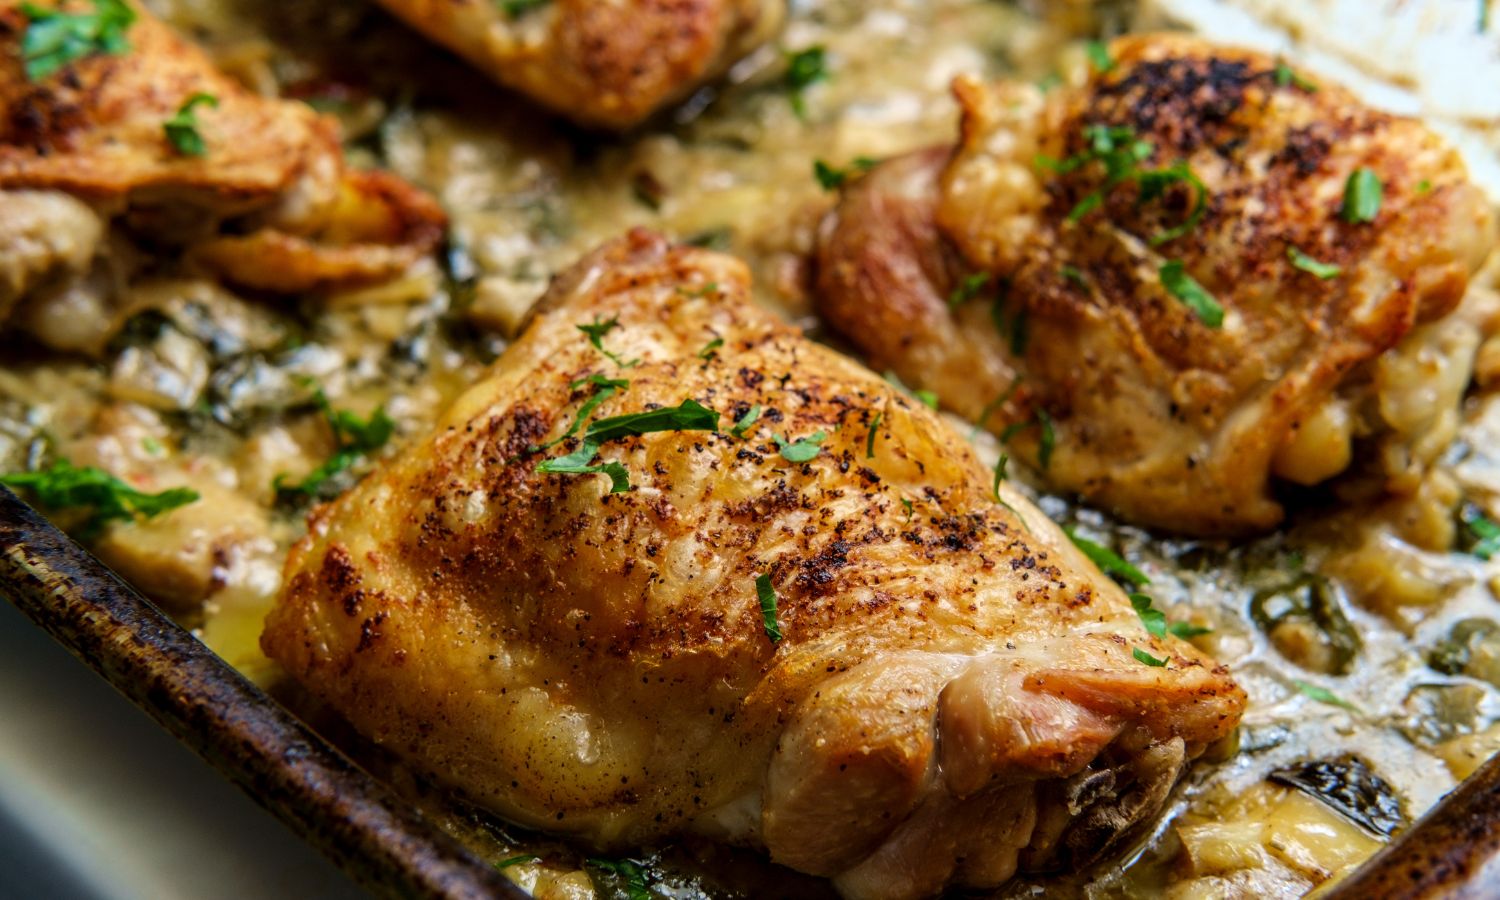 Baked chicken thighs